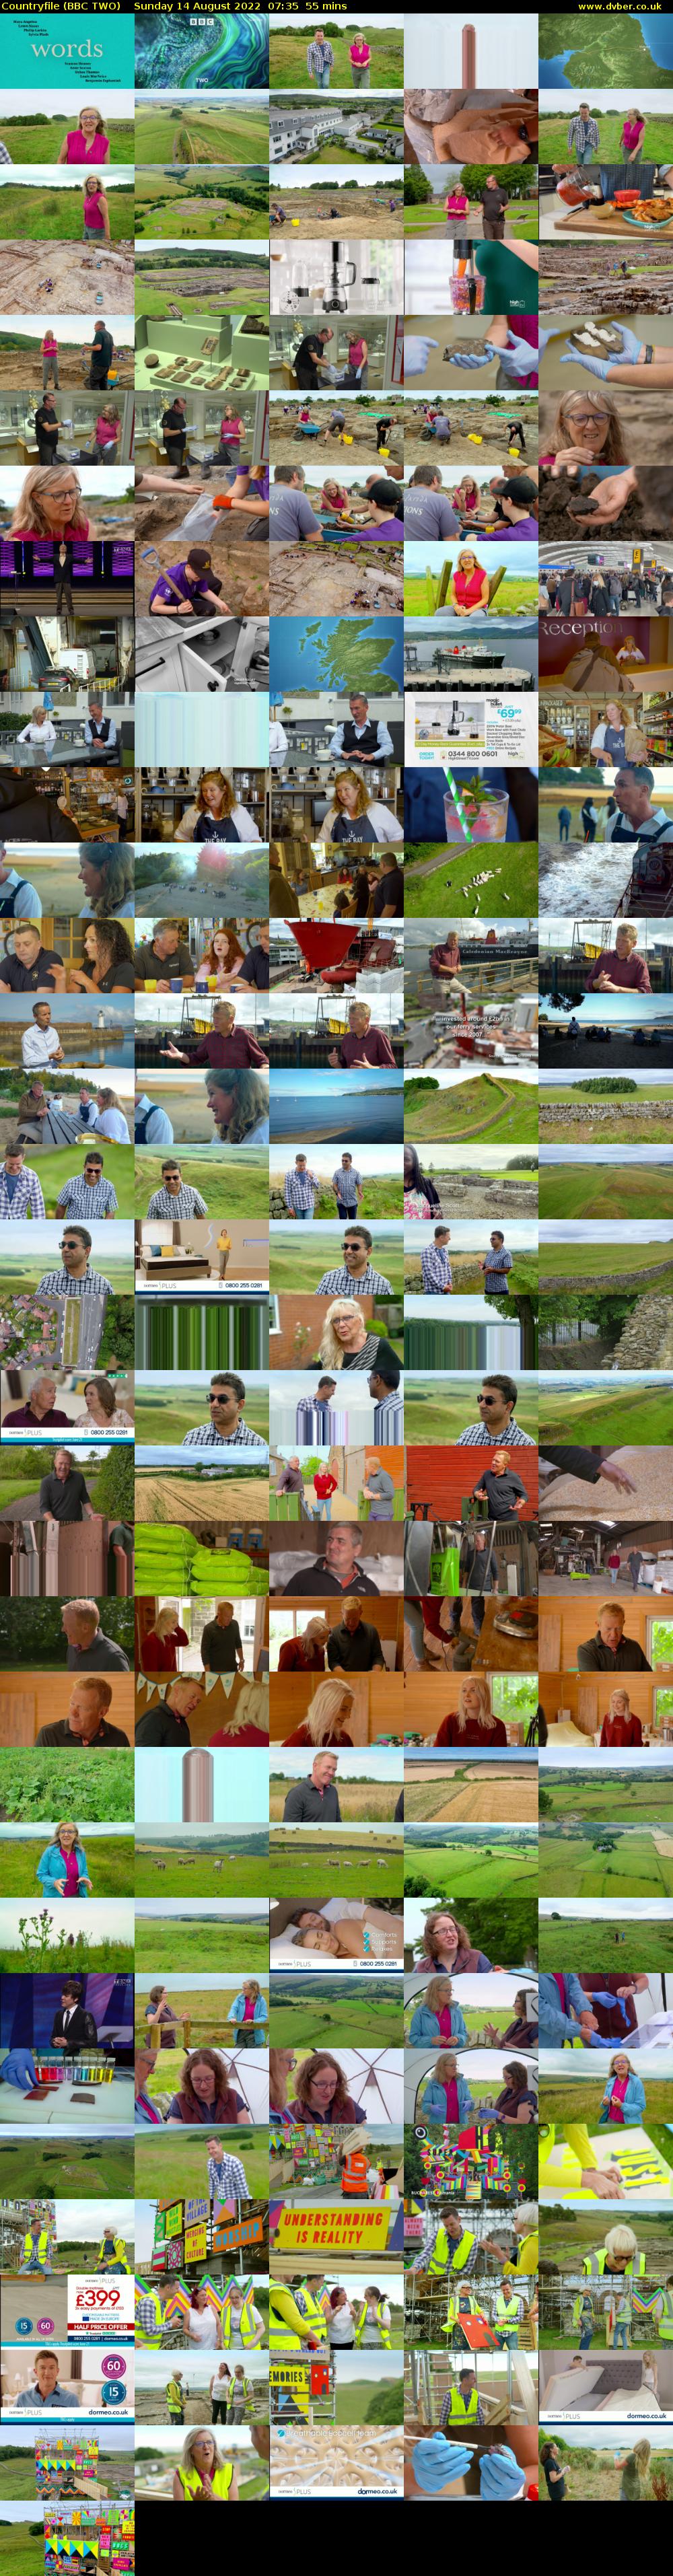 Countryfile (BBC TWO) Sunday 14 August 2022 07:35 - 08:30